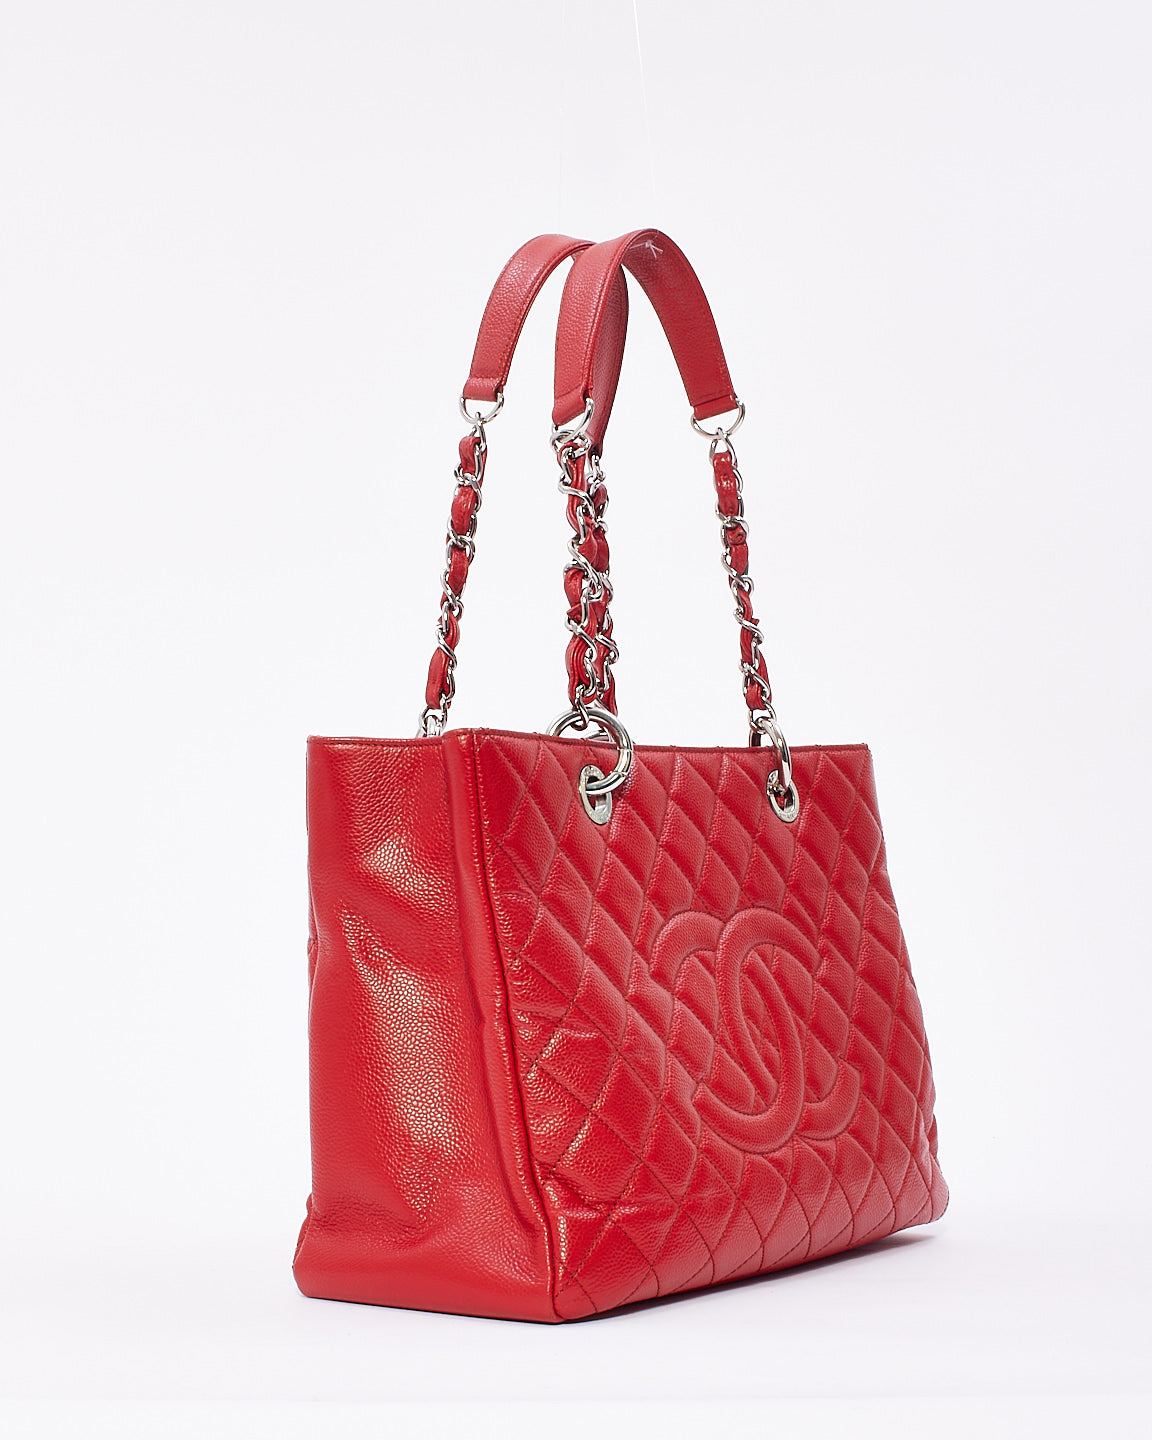 Chanel Red Caviar Leather Grand Shopping Tote